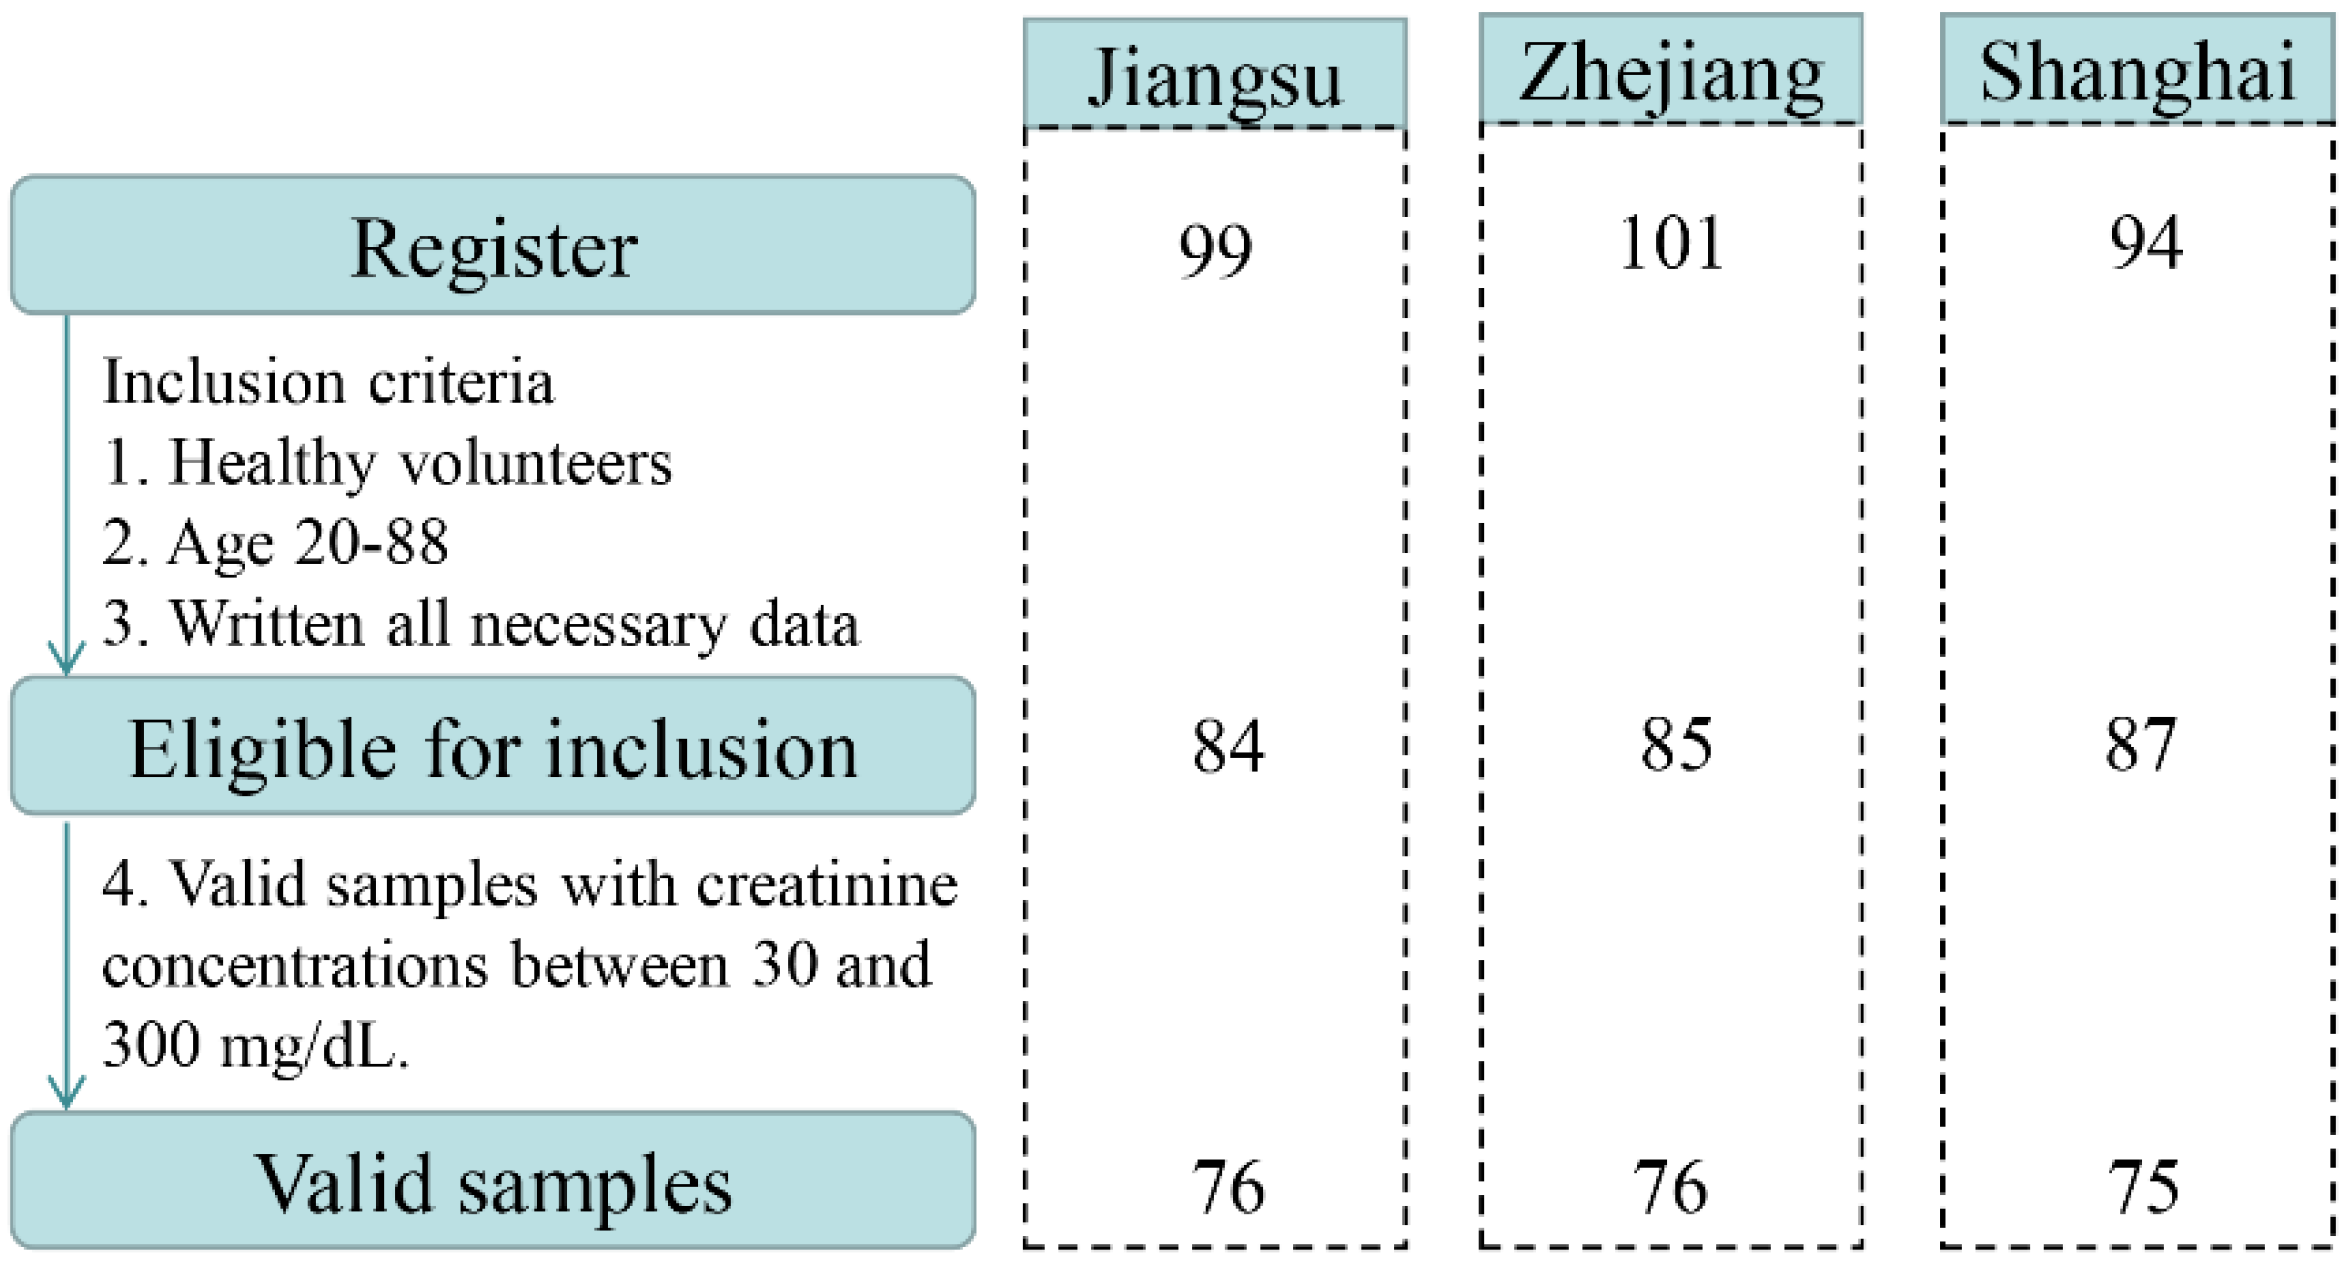 Toxins | Free Full-Text | Exposure Assessment of Multiple Mycotoxins and  Cumulative Health Risk Assessment: A Biomonitoring-Based Study in the  Yangtze River Delta, China